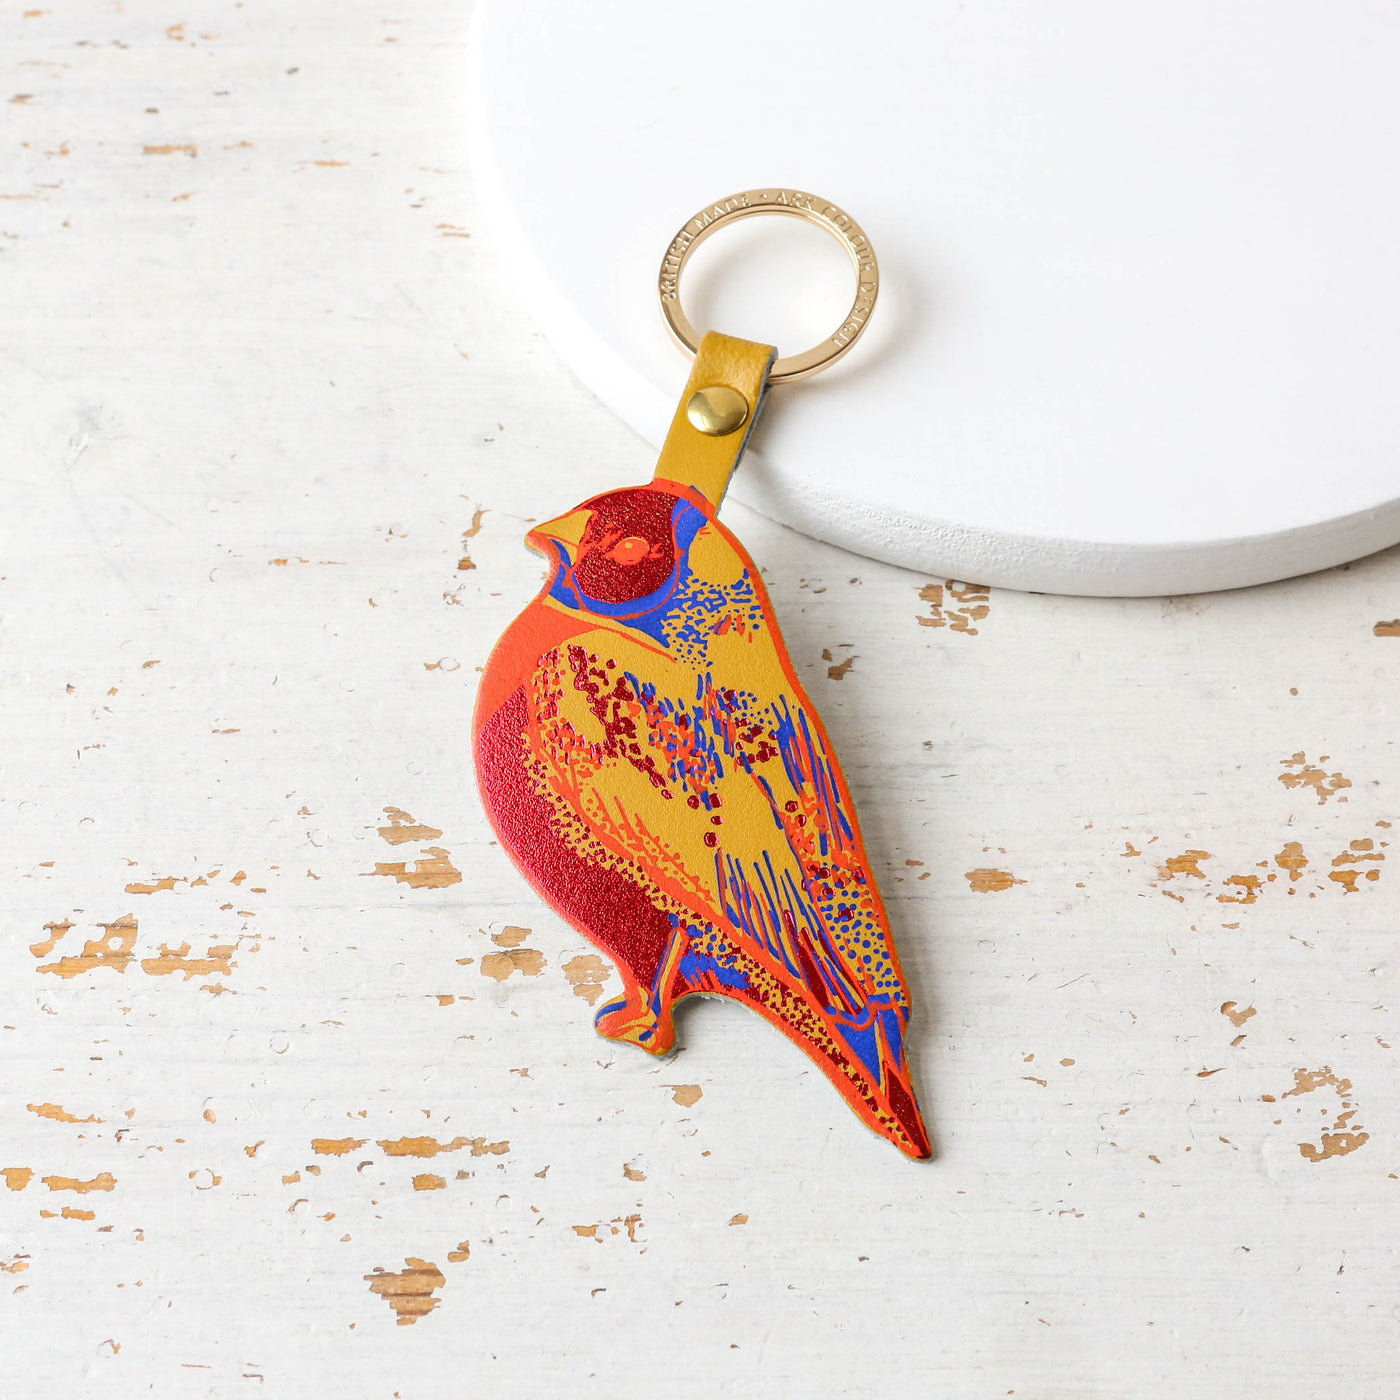 Finch Shaped Leather Key Fob